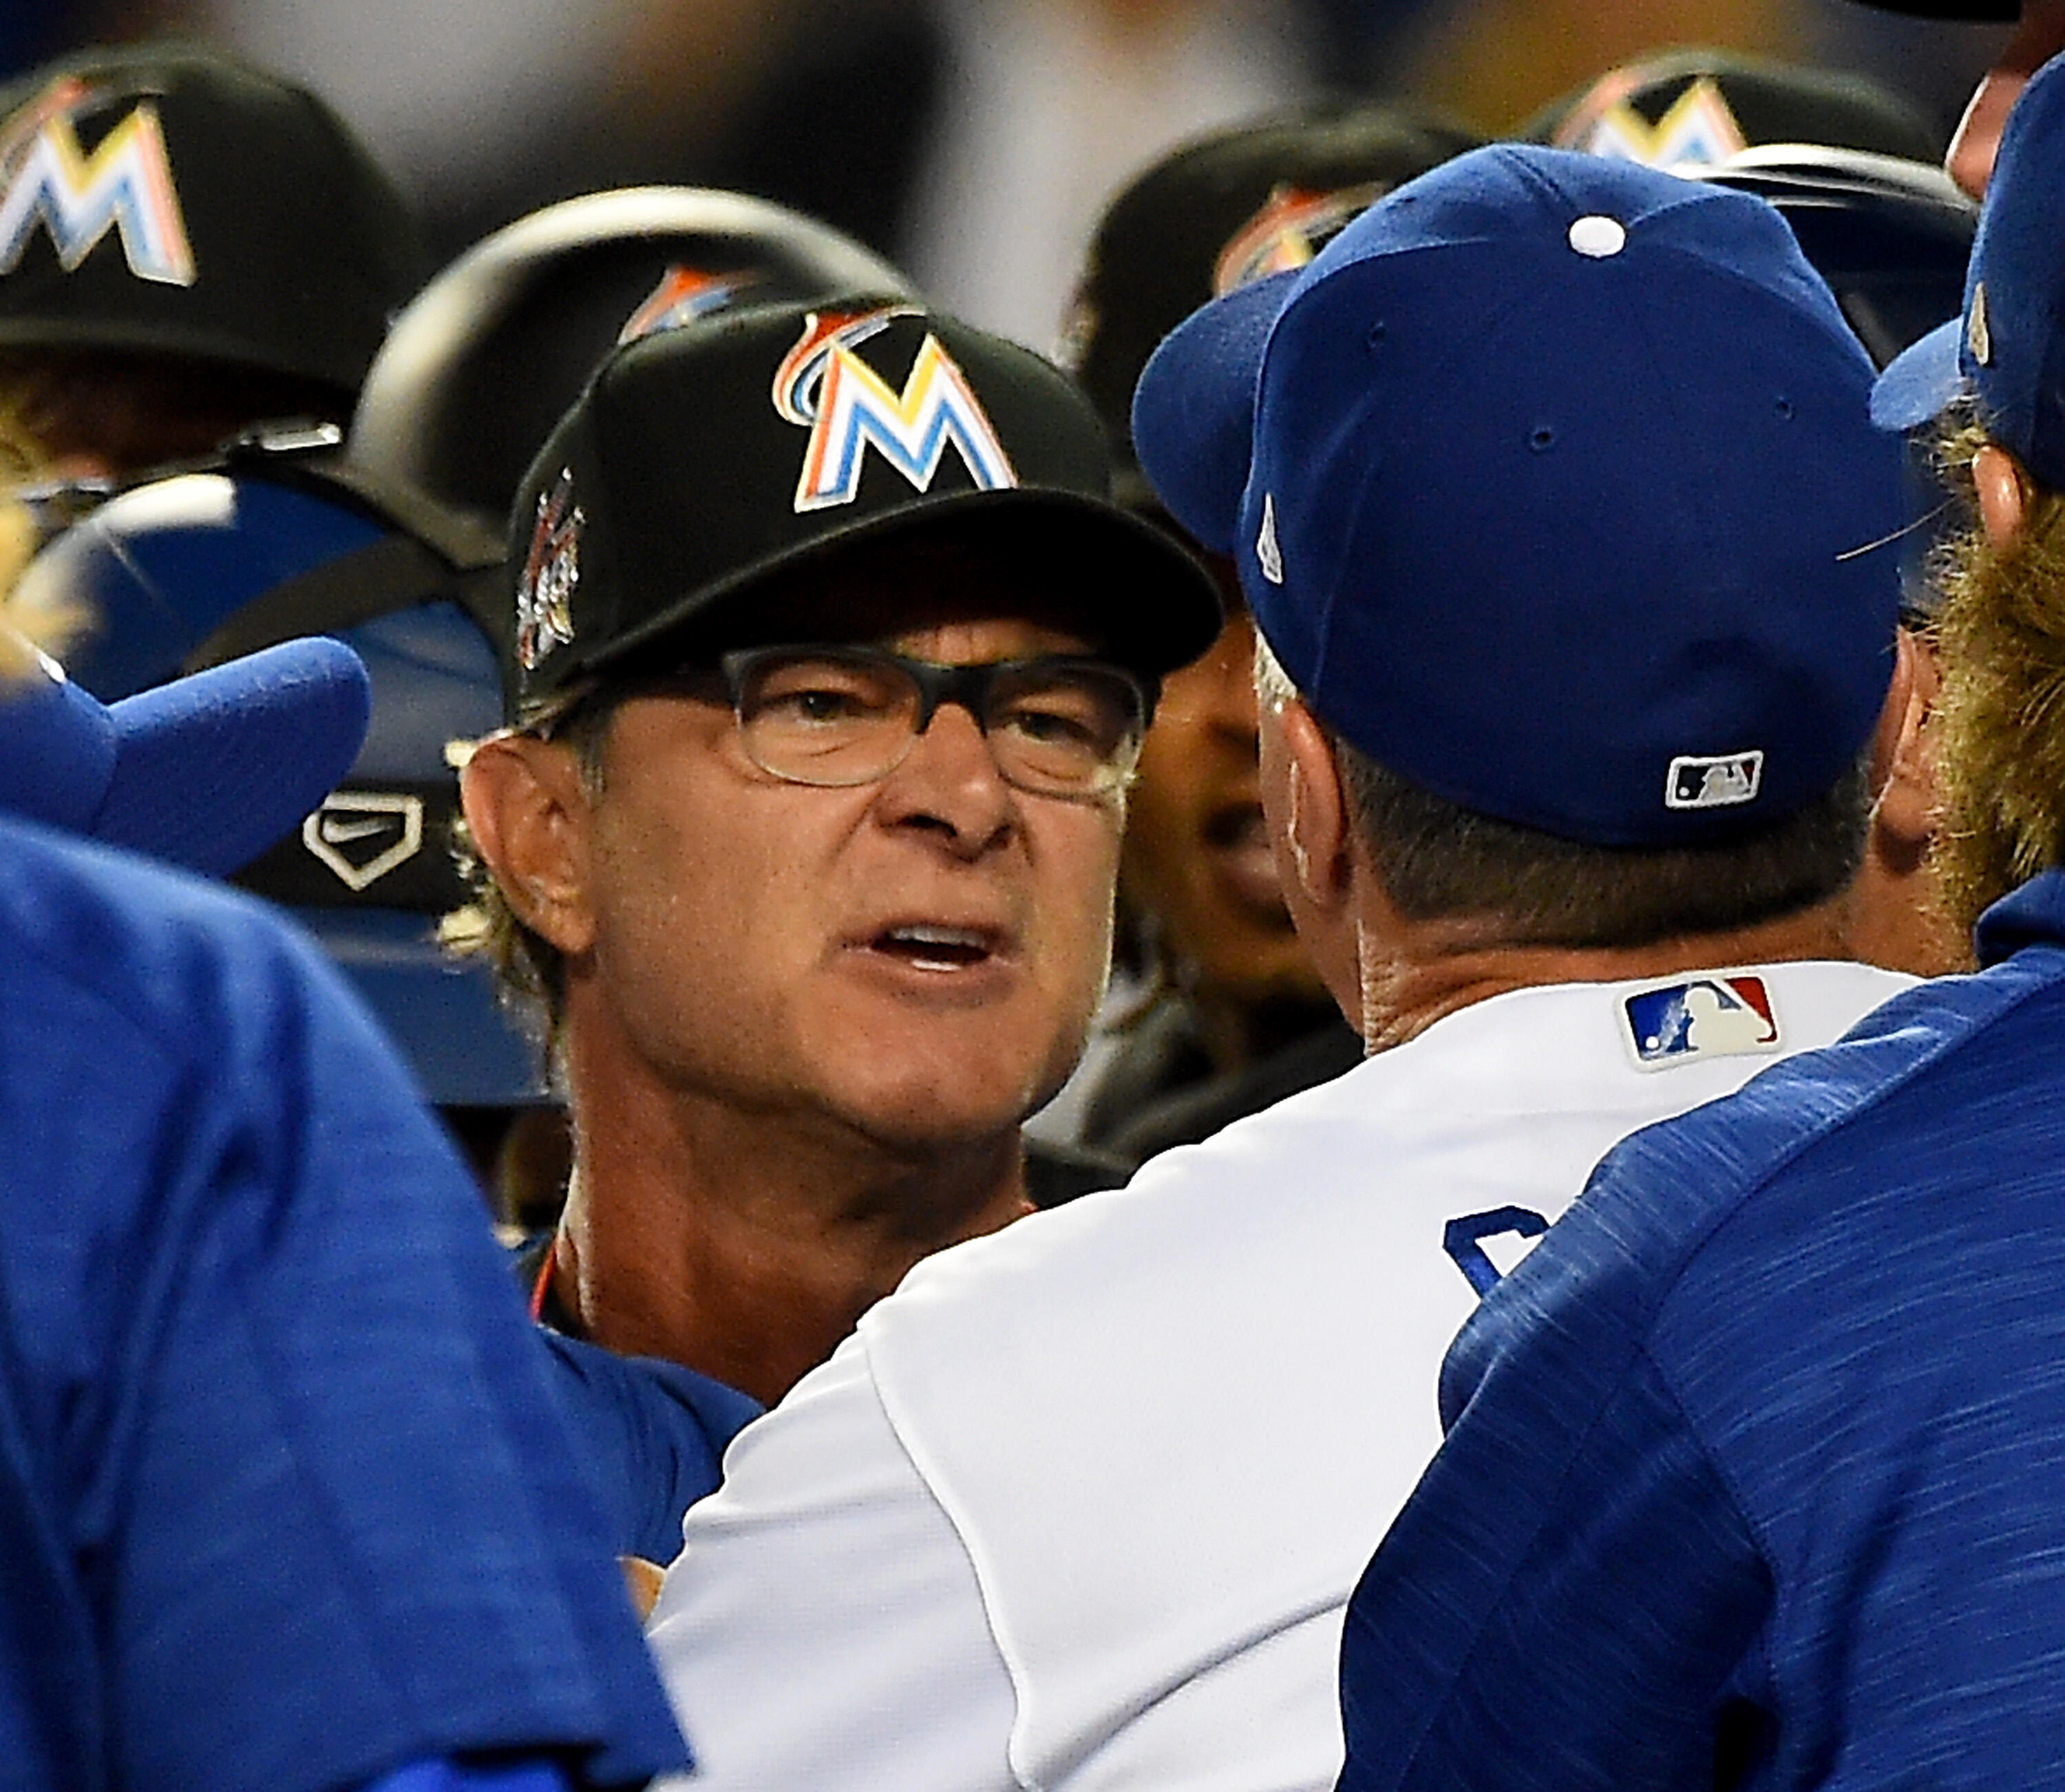 LOS ANGELES, CA - MAY 19:  Don Mattingly #8, manager of the Miami Marlins and Bob Geren #8, bench coach of the Los Angeles Dodgers exchange words after benches cleared in the eighth inning at Dodger Stadium on May 19, 2017 in Los Angeles, California. Both